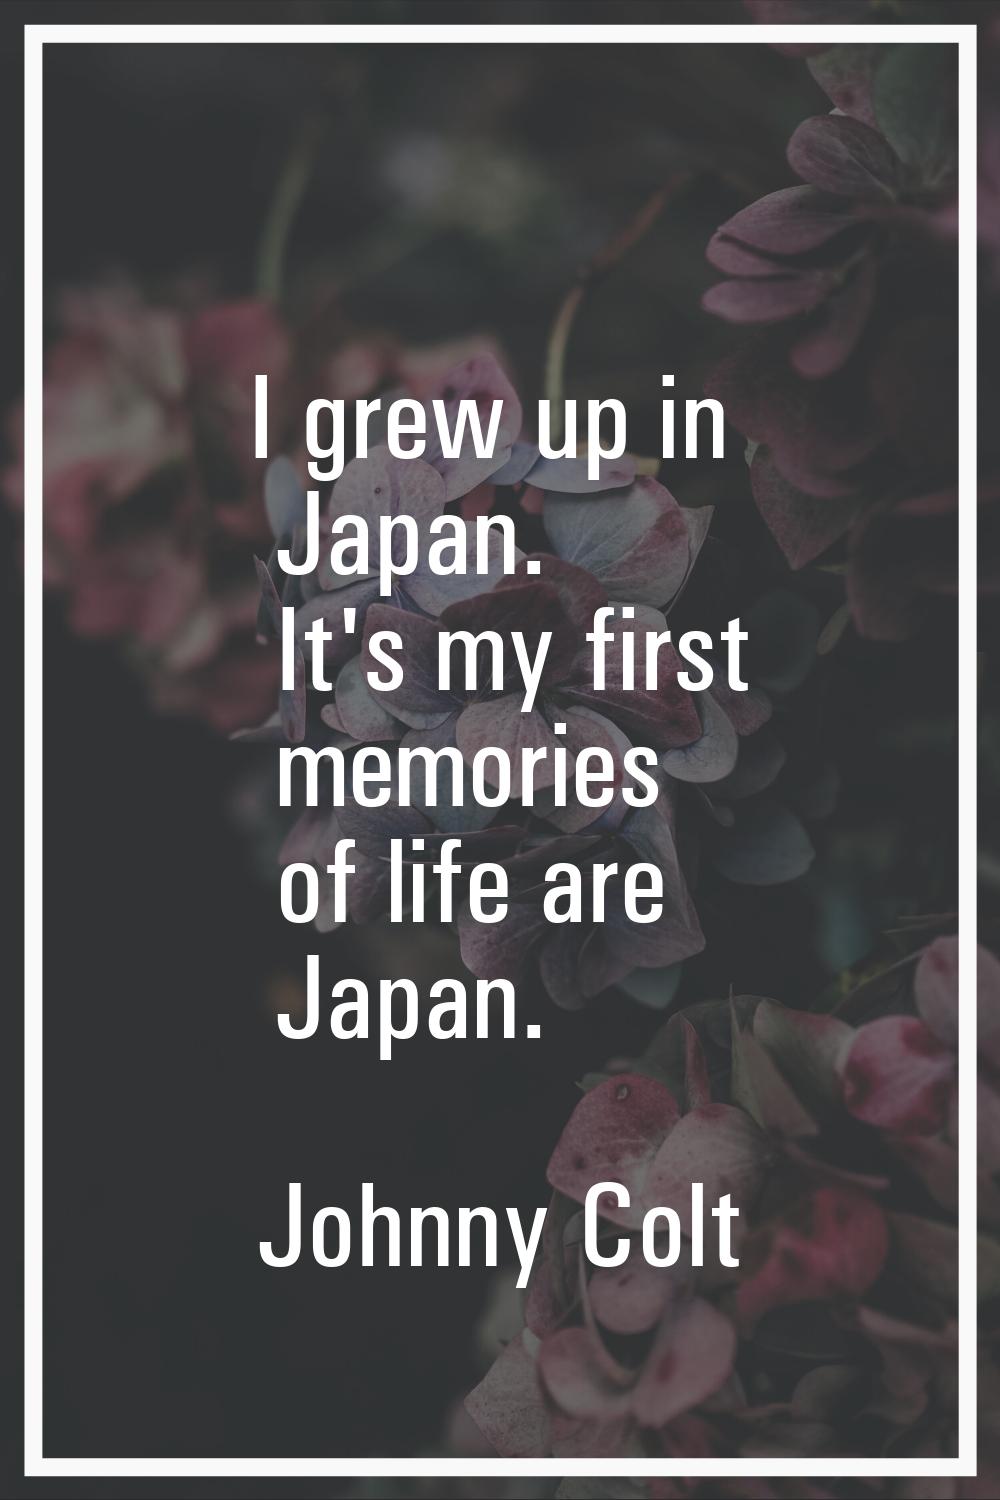 I grew up in Japan. It's my first memories of life are Japan.